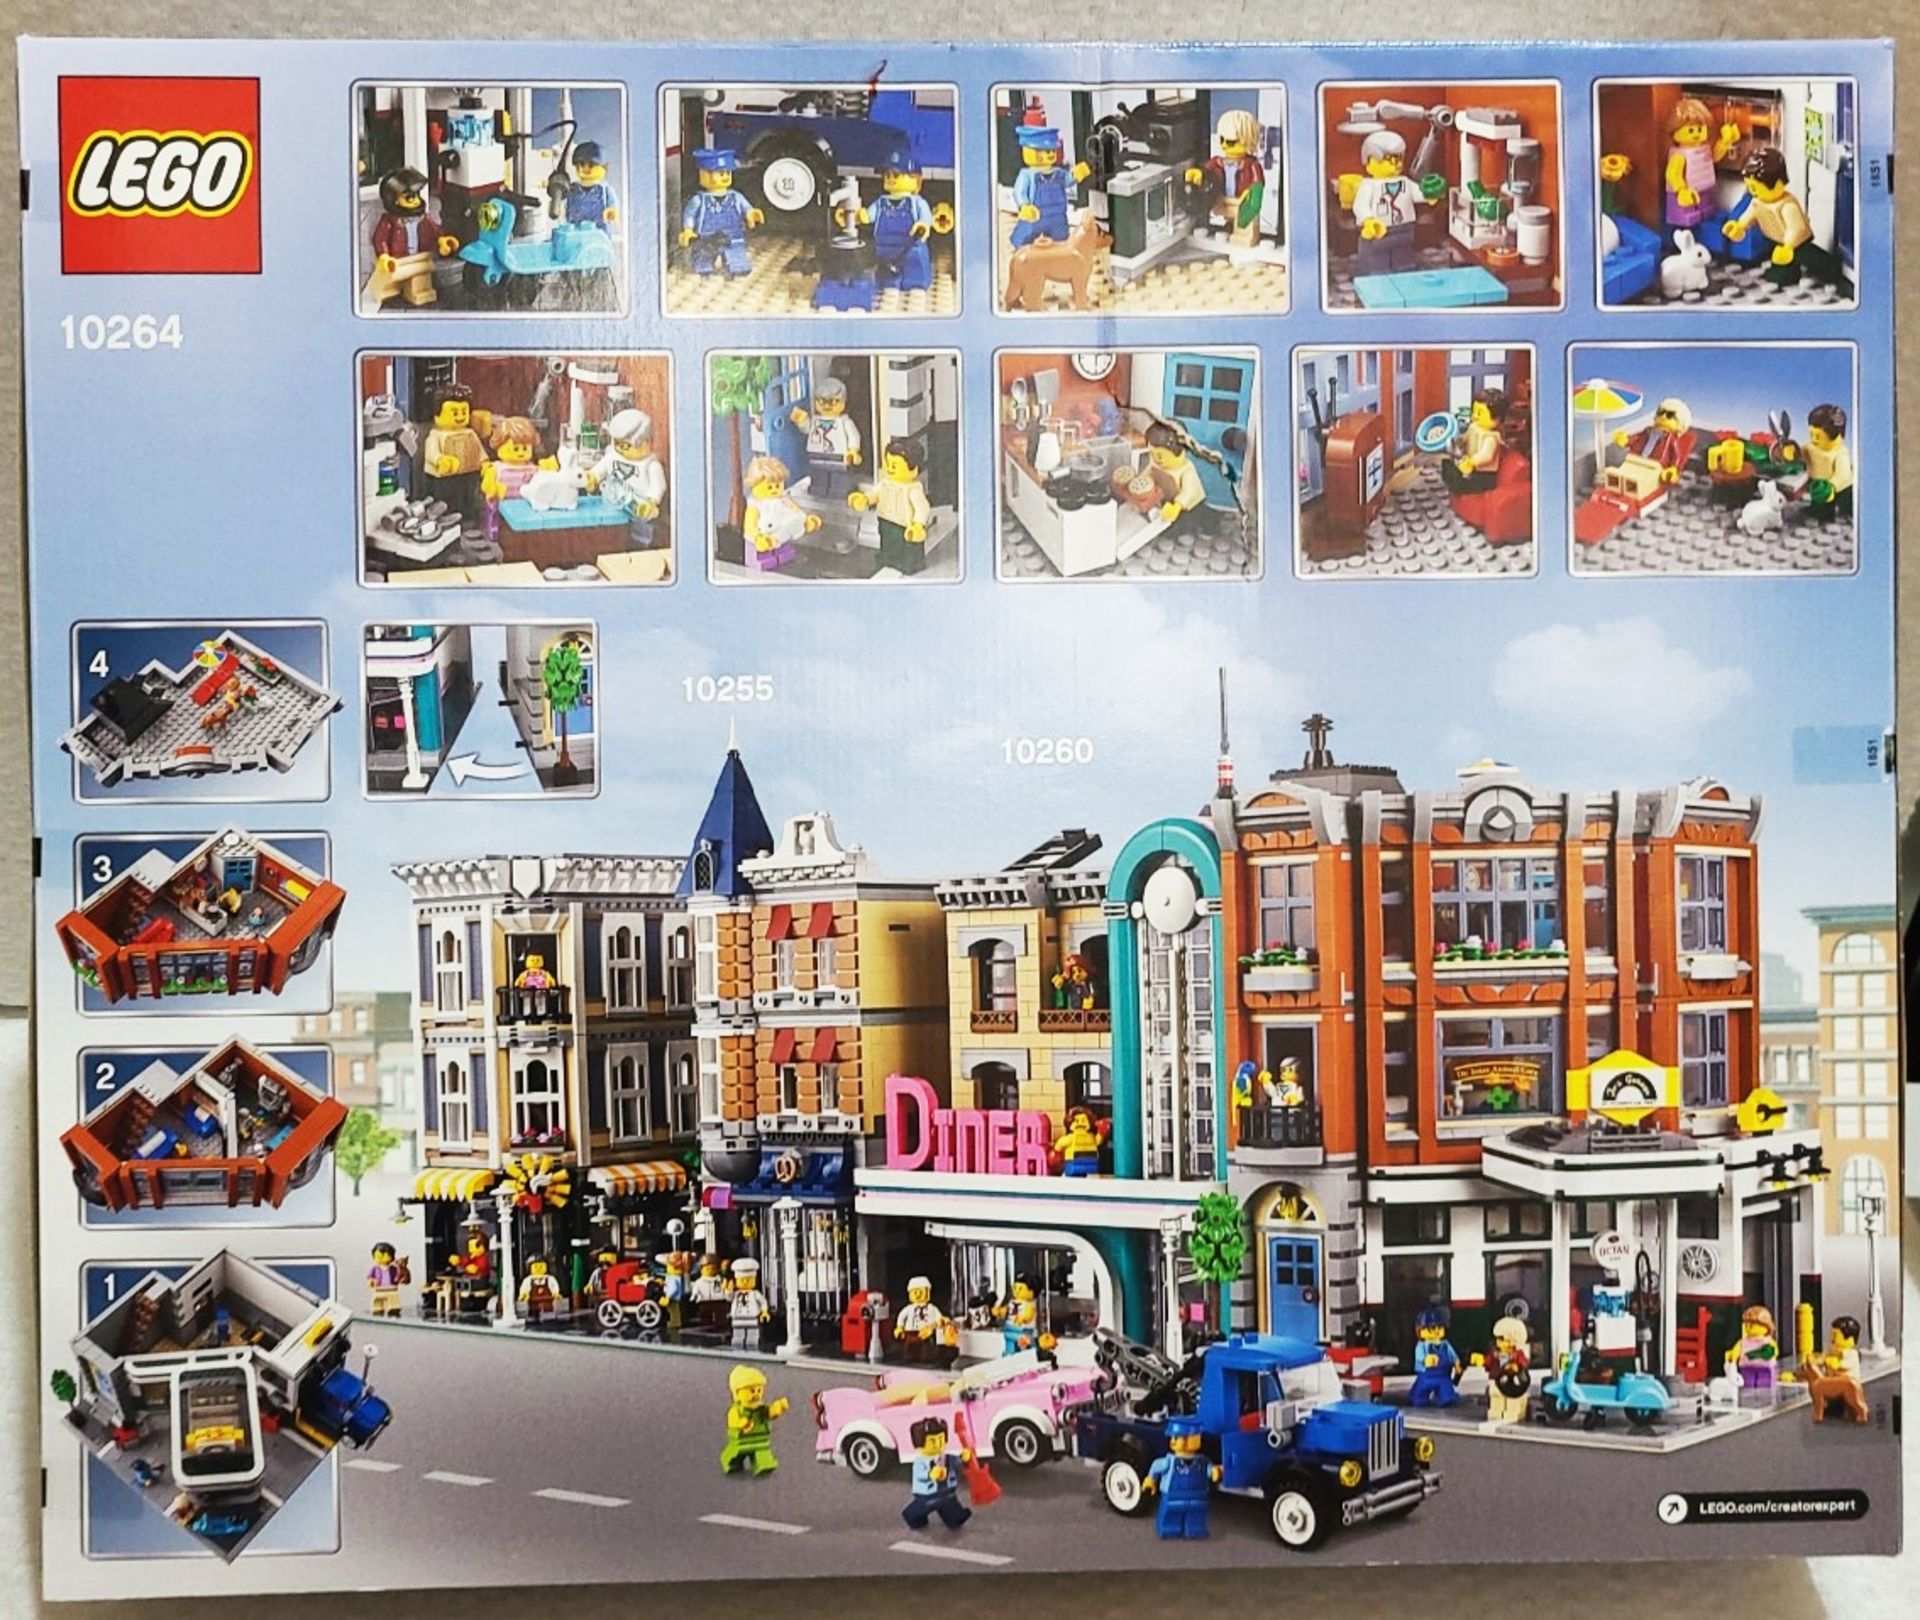 1 x LEGO Creator Expert 10264 Corner Garage And Vet Clinic Set with 6 Minifigures - RRP £260.00 - Image 2 of 5